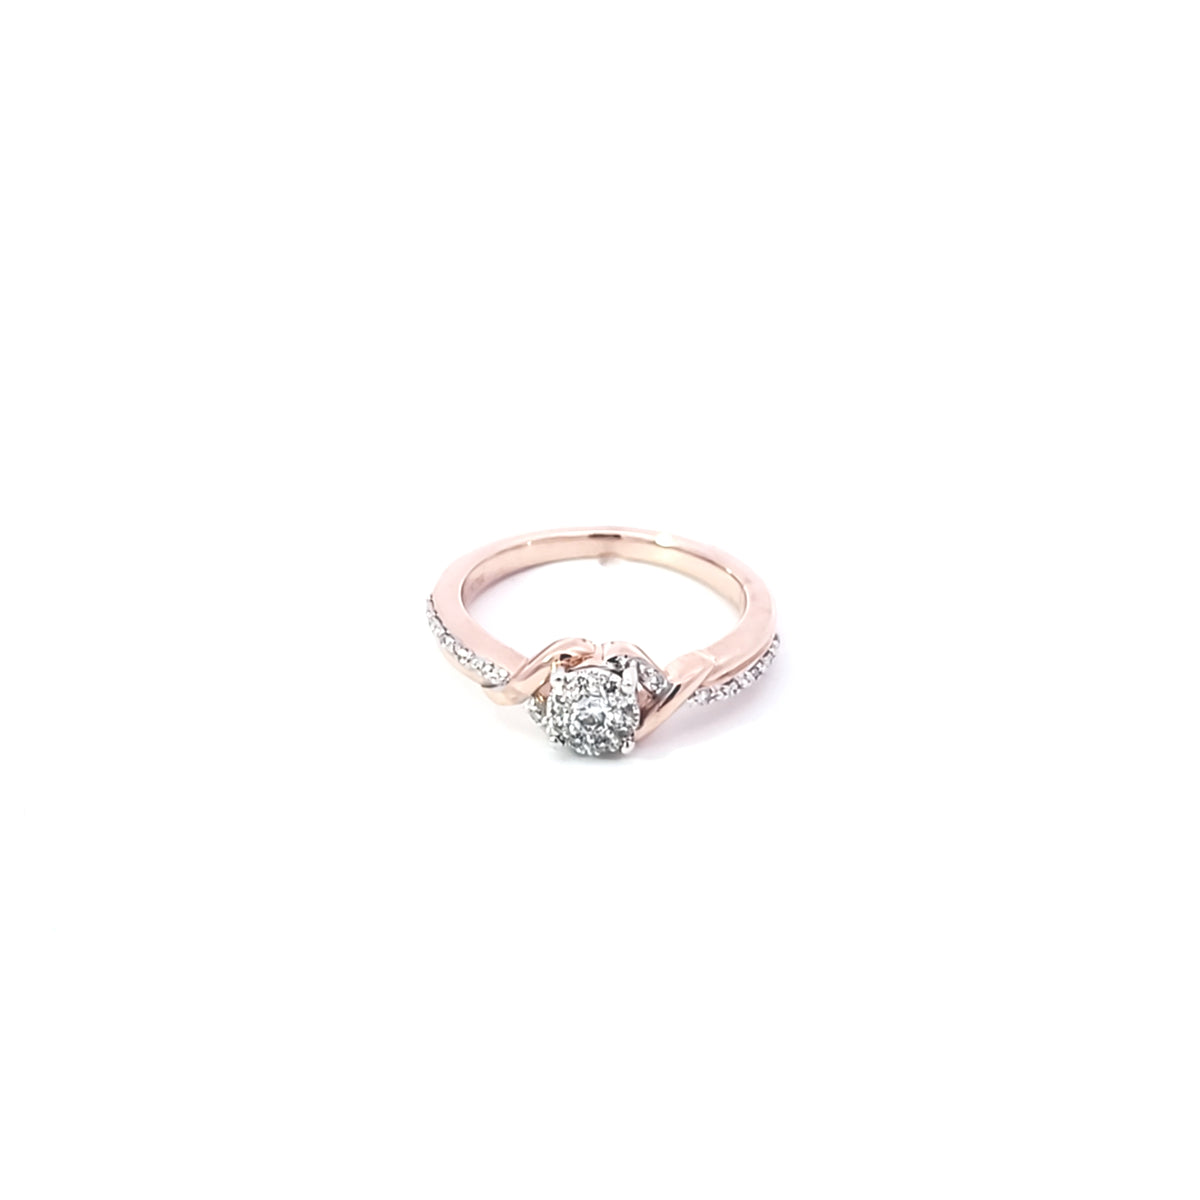 10K White and Rose Gold 0.19 cttw Diamond Ring